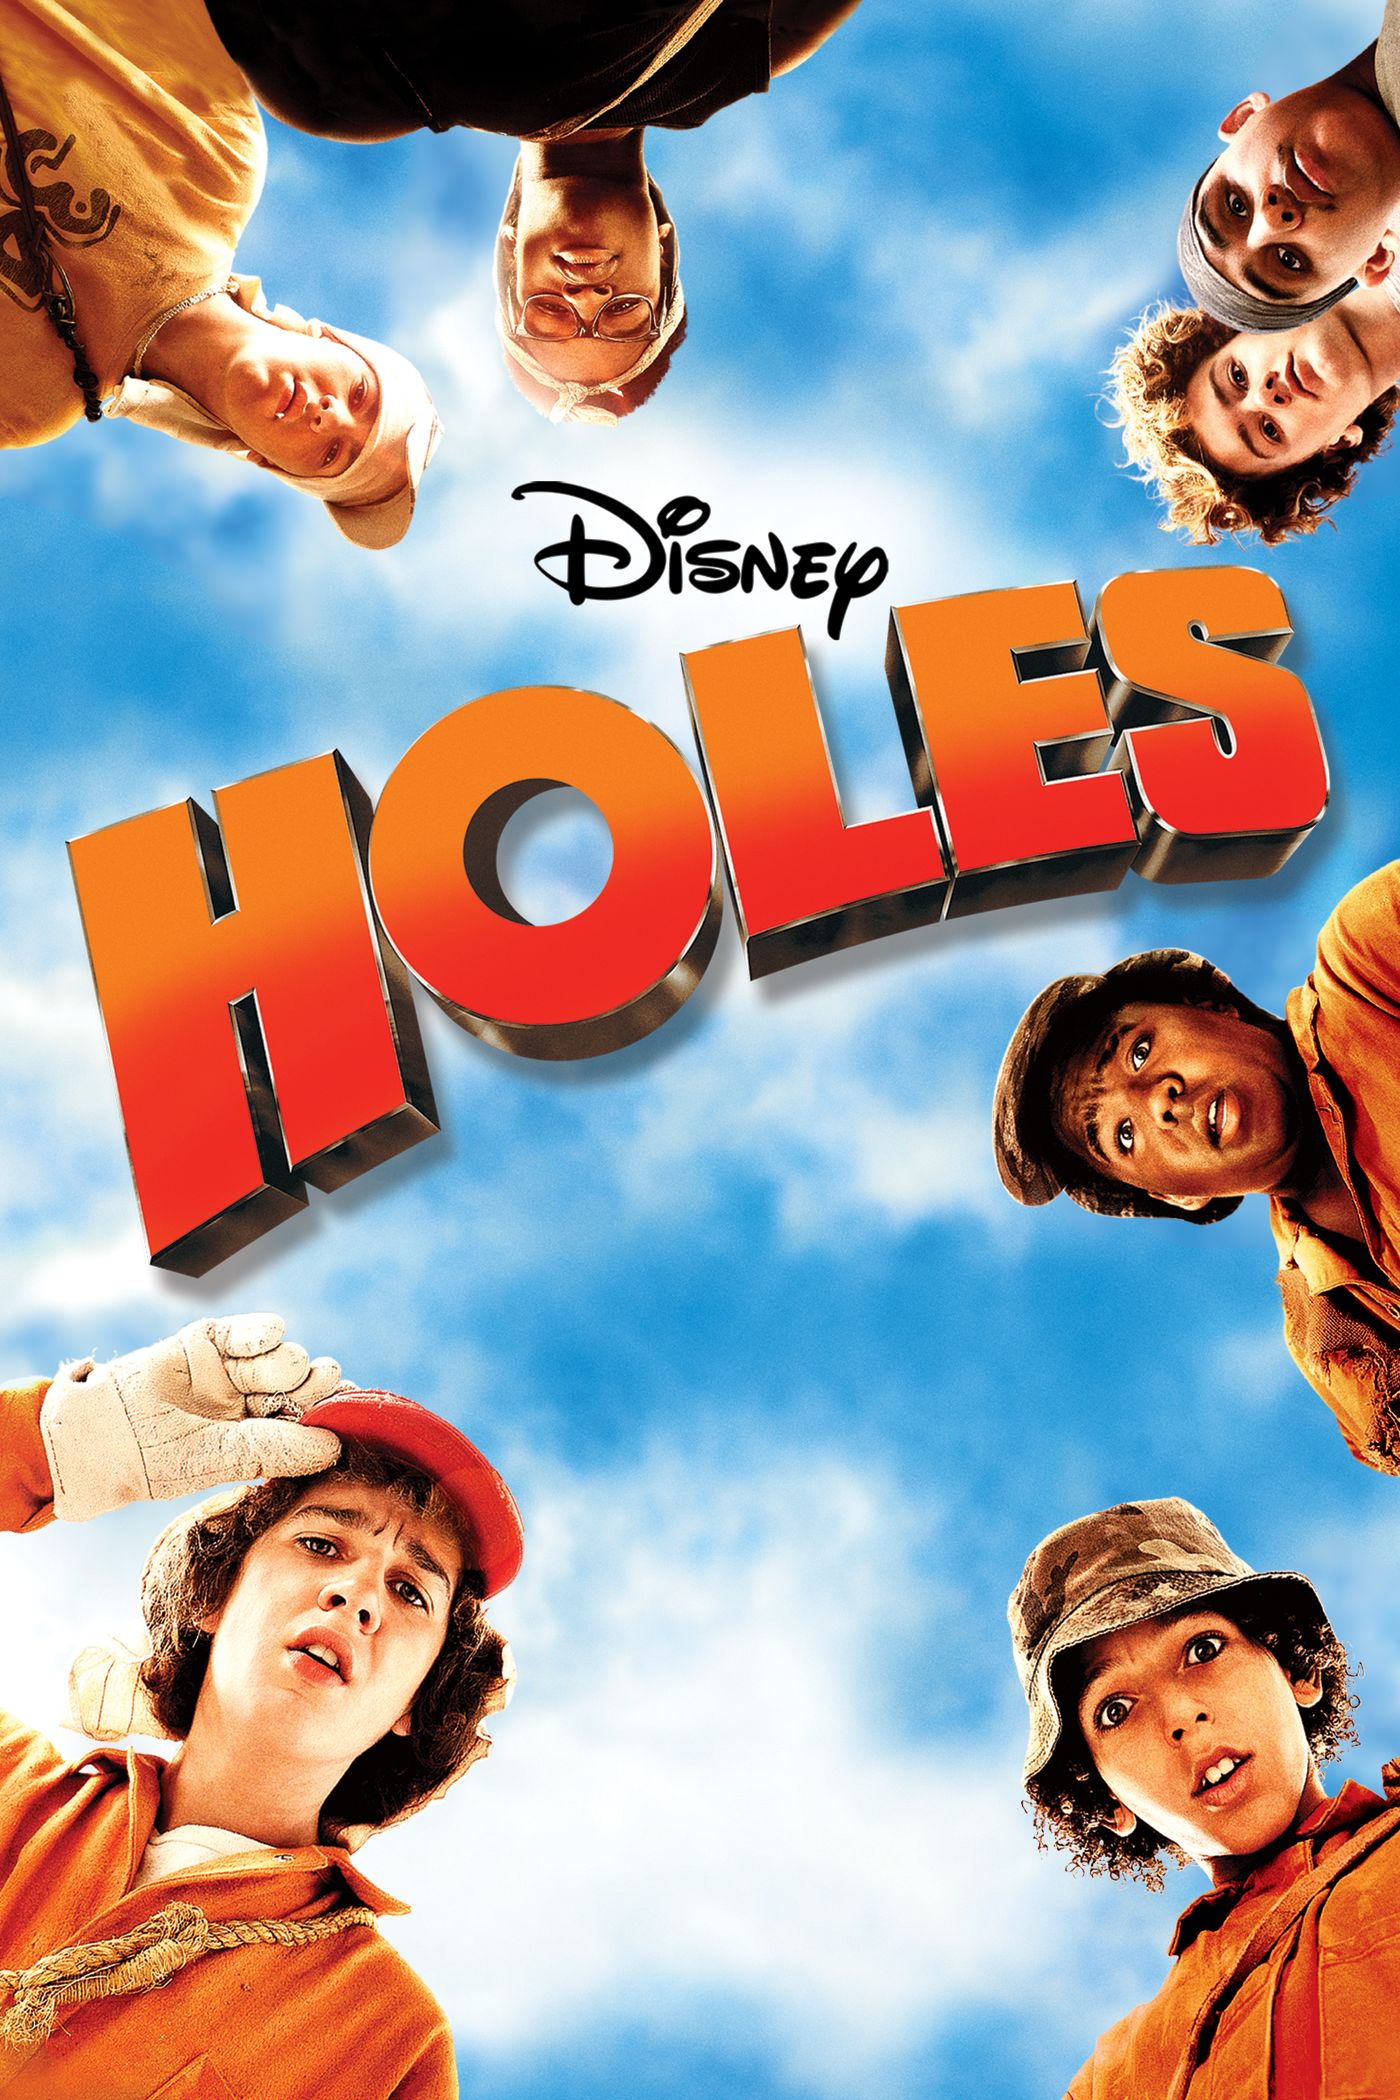 Holes Movie Gifts & Merchandise for Sale